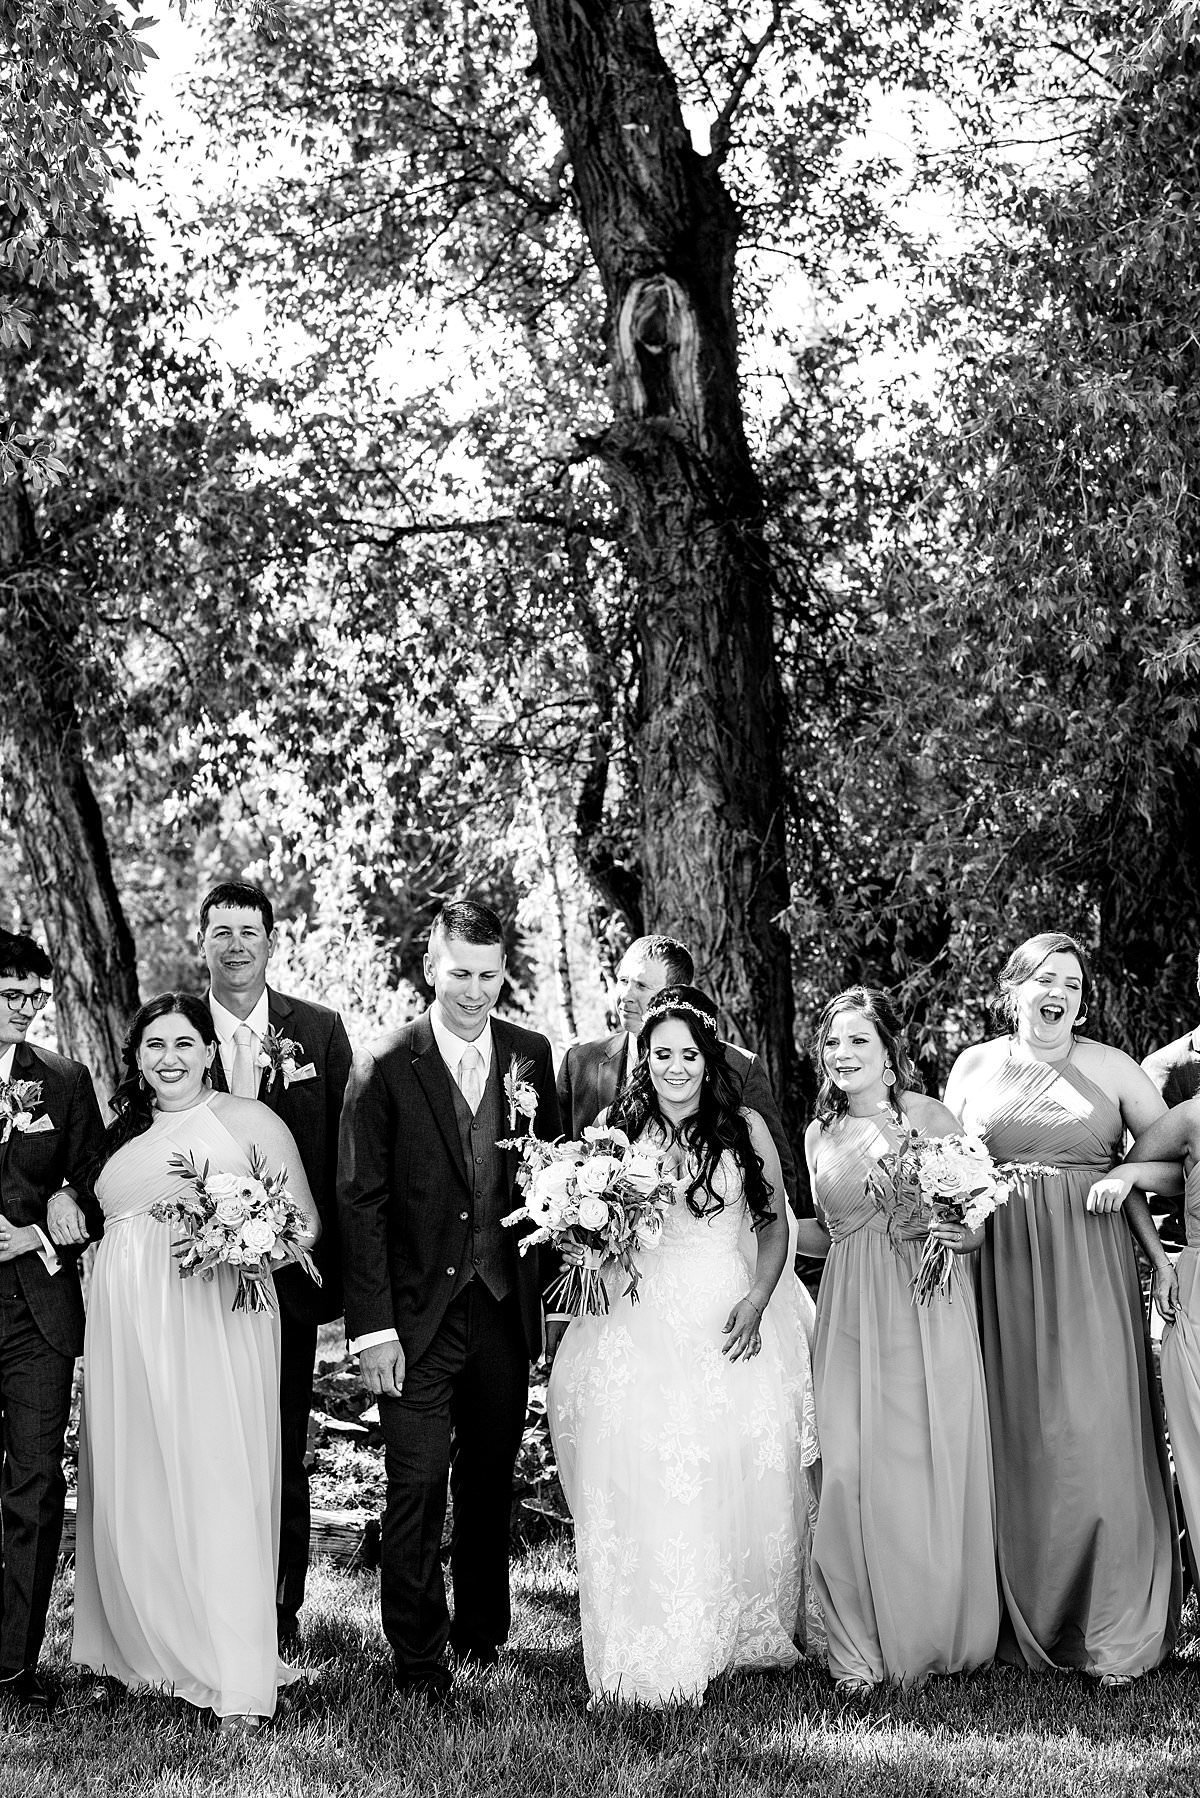 Black and white photo of wedding party walking  together outside